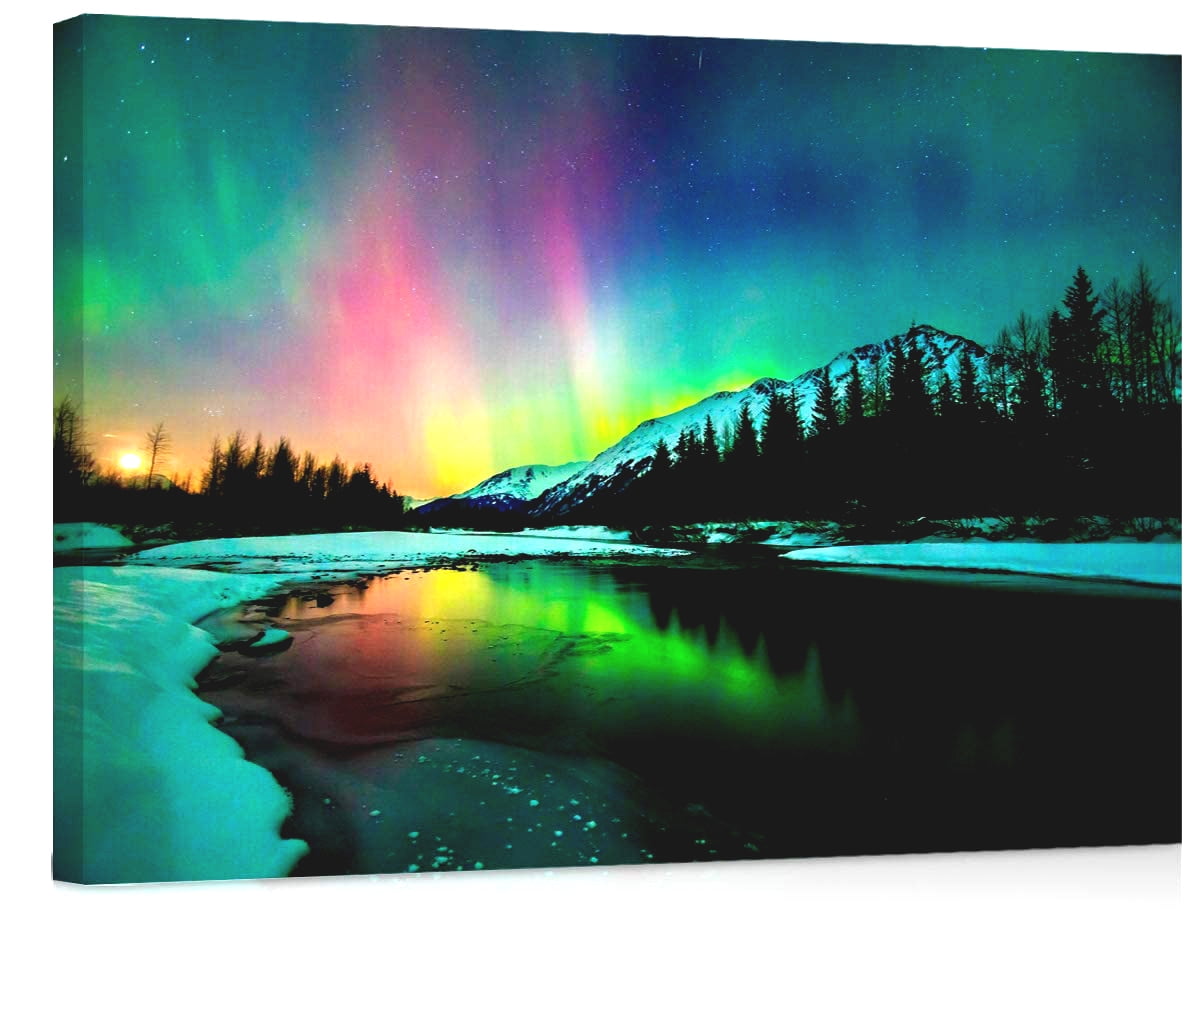 Amazing Nature lighting and Lake Picture Print On Framed Canvas Wall Art Decor 